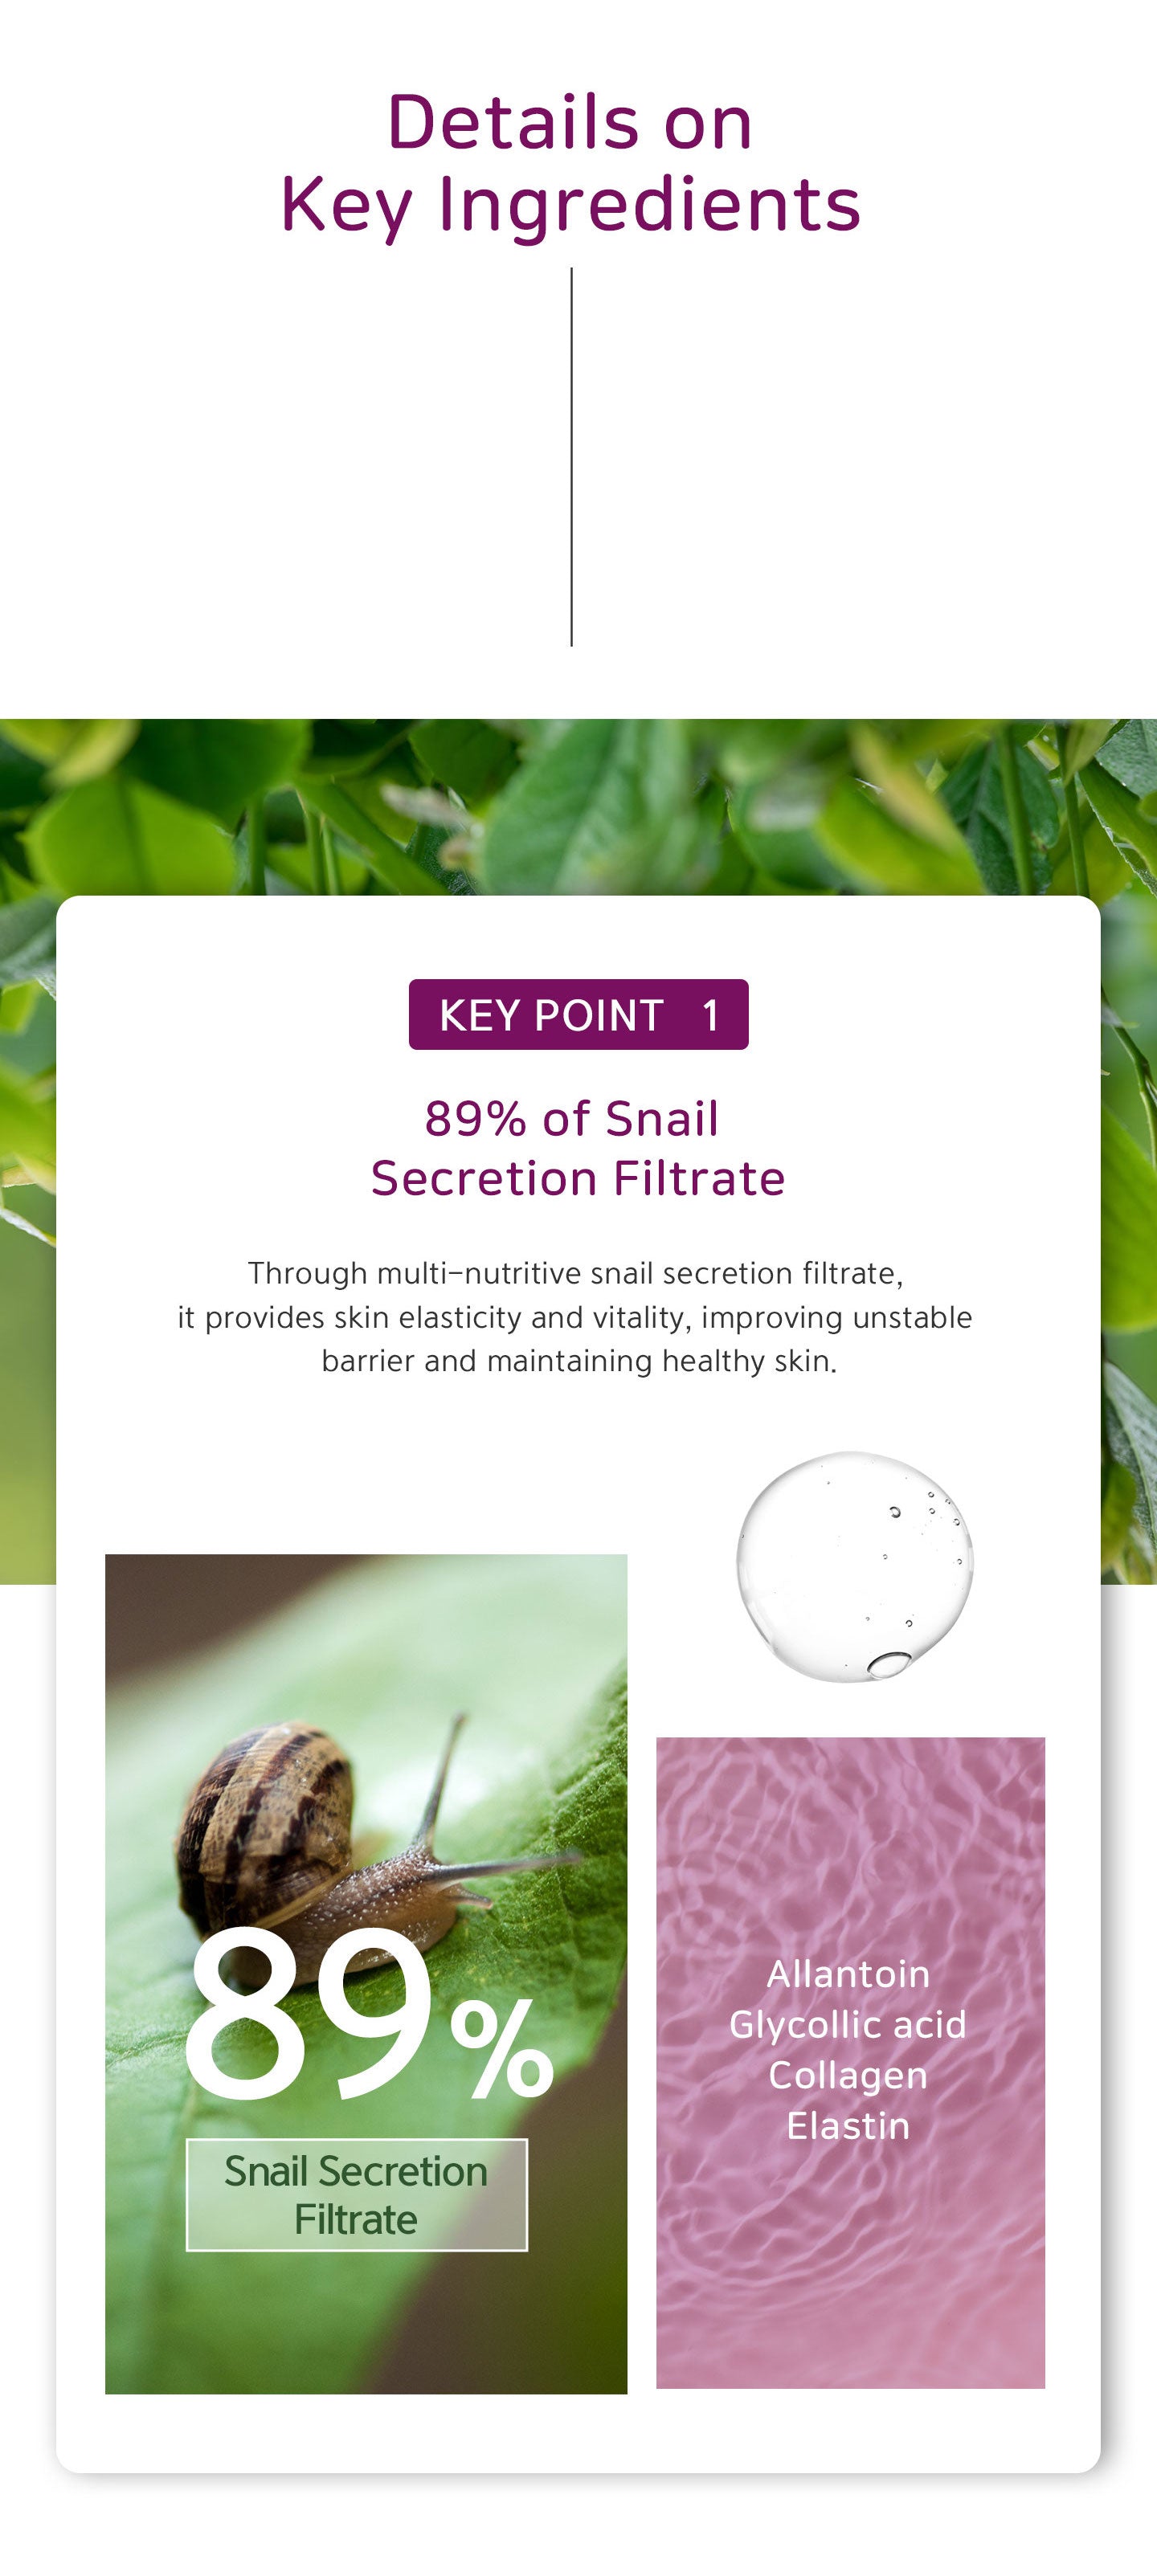 Through multi-nutritive snail secretion filtrate, it provides skin elasticity and vitality, improving unstable barrier and maintaining healthy skin. Allantoin, glycollic acid, collagen and elastin. 